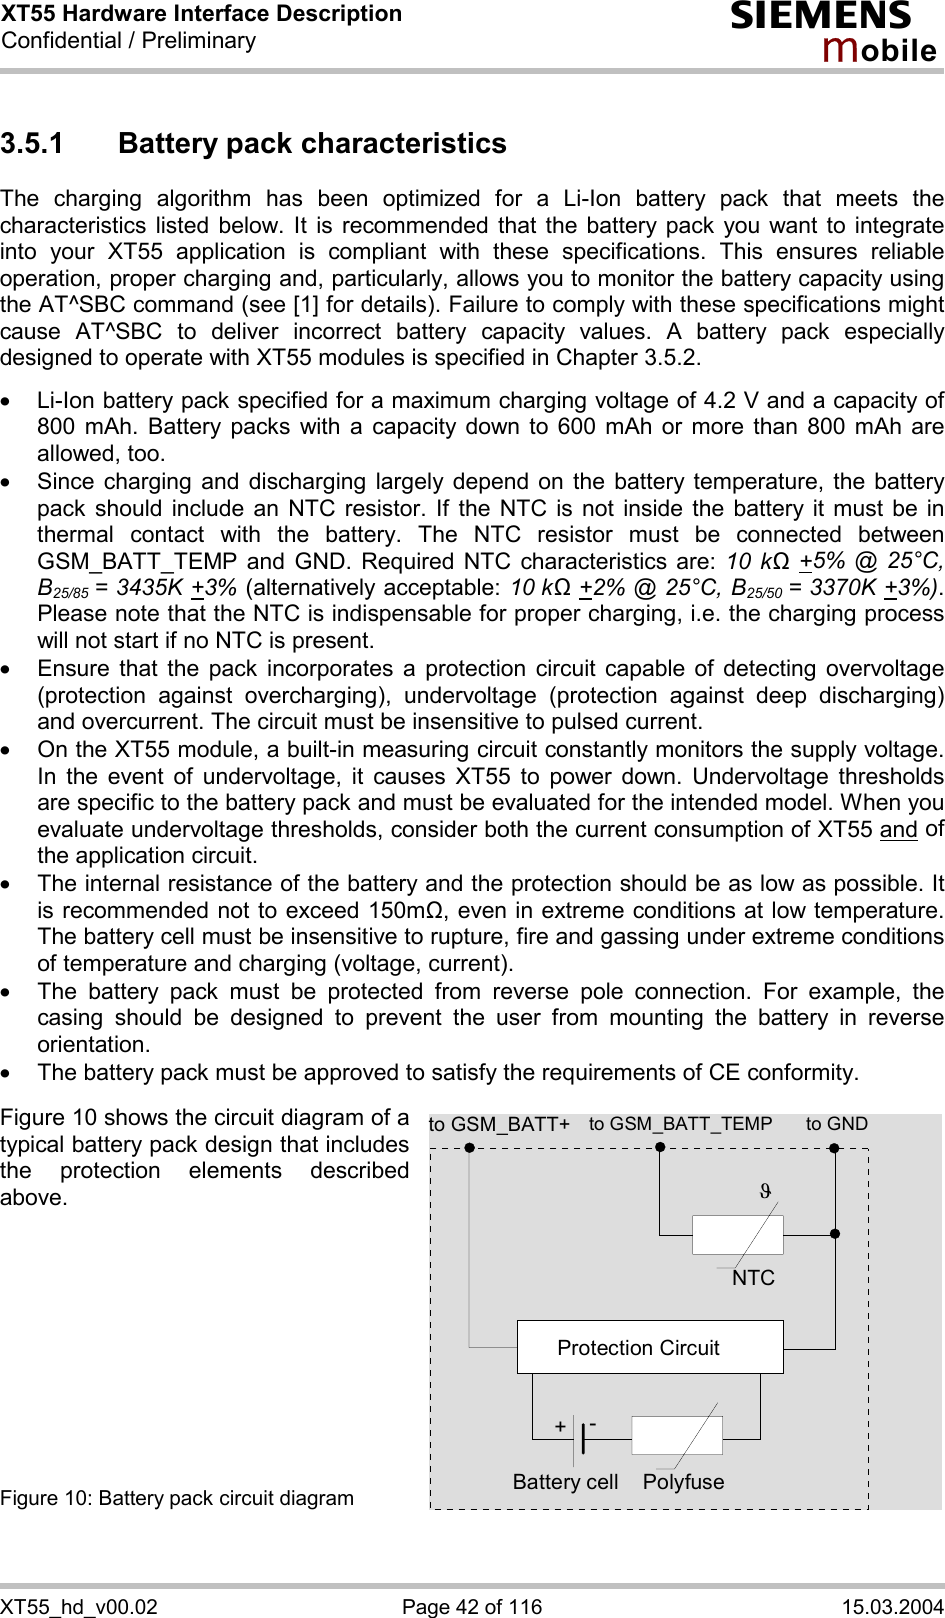 XT55 Hardware Interface Description Confidential / Preliminary s mo b i l e XT55_hd_v00.02  Page 42 of 116  15.03.2004 3.5.1  Battery pack characteristics The charging algorithm has been optimized for a Li-Ion battery pack that meets the characteristics listed below. It is recommended that the battery pack you want to integrate into your XT55 application is compliant with these specifications. This ensures reliable operation, proper charging and, particularly, allows you to monitor the battery capacity using the AT^SBC command (see [1] for details). Failure to comply with these specifications might cause AT^SBC to deliver incorrect battery capacity values. A battery pack especially designed to operate with XT55 modules is specified in Chapter 3.5.2.  ·  Li-Ion battery pack specified for a maximum charging voltage of 4.2 V and a capacity of 800 mAh. Battery packs with a capacity down to 600 mAh or more than 800 mAh are allowed, too. ·  Since charging and discharging largely depend on the battery temperature, the battery pack should include an NTC resistor. If the NTC is not inside the battery it must be in thermal contact with the battery. The NTC resistor must be connected between GSM_BATT_TEMP and GND. Required NTC characteristics are: 10 kΩ +5% @ 25°C, B25/85 = 3435K +3% (alternatively acceptable: 10 kΩ +2% @ 25°C, B25/50  = 3370K +3%). Please note that the NTC is indispensable for proper charging, i.e. the charging process will not start if no NTC is present. ·  Ensure that the pack incorporates a protection circuit capable of detecting overvoltage (protection against overcharging), undervoltage (protection against deep discharging) and overcurrent. The circuit must be insensitive to pulsed current. ·  On the XT55 module, a built-in measuring circuit constantly monitors the supply voltage. In the event of undervoltage, it causes XT55 to power down. Undervoltage thresholds are specific to the battery pack and must be evaluated for the intended model. When you evaluate undervoltage thresholds, consider both the current consumption of XT55 and of the application circuit.  ·  The internal resistance of the battery and the protection should be as low as possible. It is recommended not to exceed 150m&quot;, even in extreme conditions at low temperature. The battery cell must be insensitive to rupture, fire and gassing under extreme conditions of temperature and charging (voltage, current). ·  The battery pack must be protected from reverse pole connection. For example, the casing should be designed to prevent the user from mounting the battery in reverse orientation. ·  The battery pack must be approved to satisfy the requirements of CE conformity.  Figure 10 shows the circuit diagram of a typical battery pack design that includes the protection elements described above.           Figure 10: Battery pack circuit diagram  to GSM_BATT_TEMP to GNDNTCPolyfuseJProtection Circuit+-Battery cellto GSM_BATT+